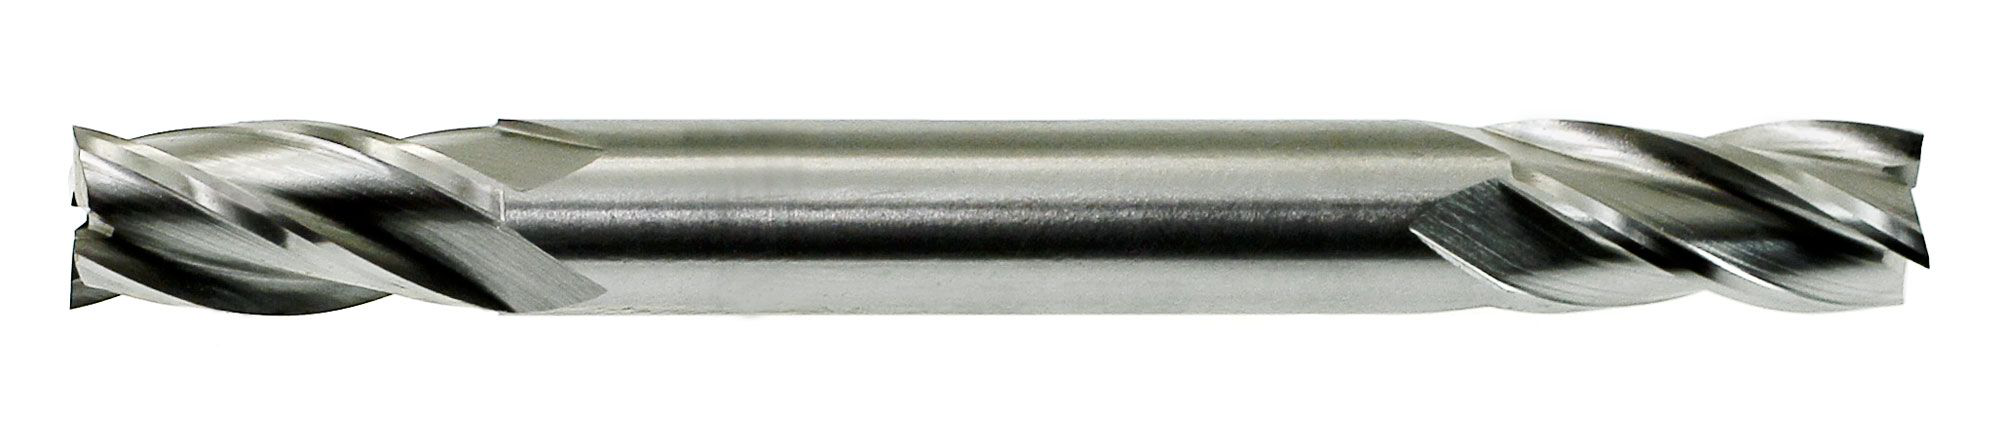 5/8, 4 FLUTE DOUBLE END END-MILL 5/8"SHANK